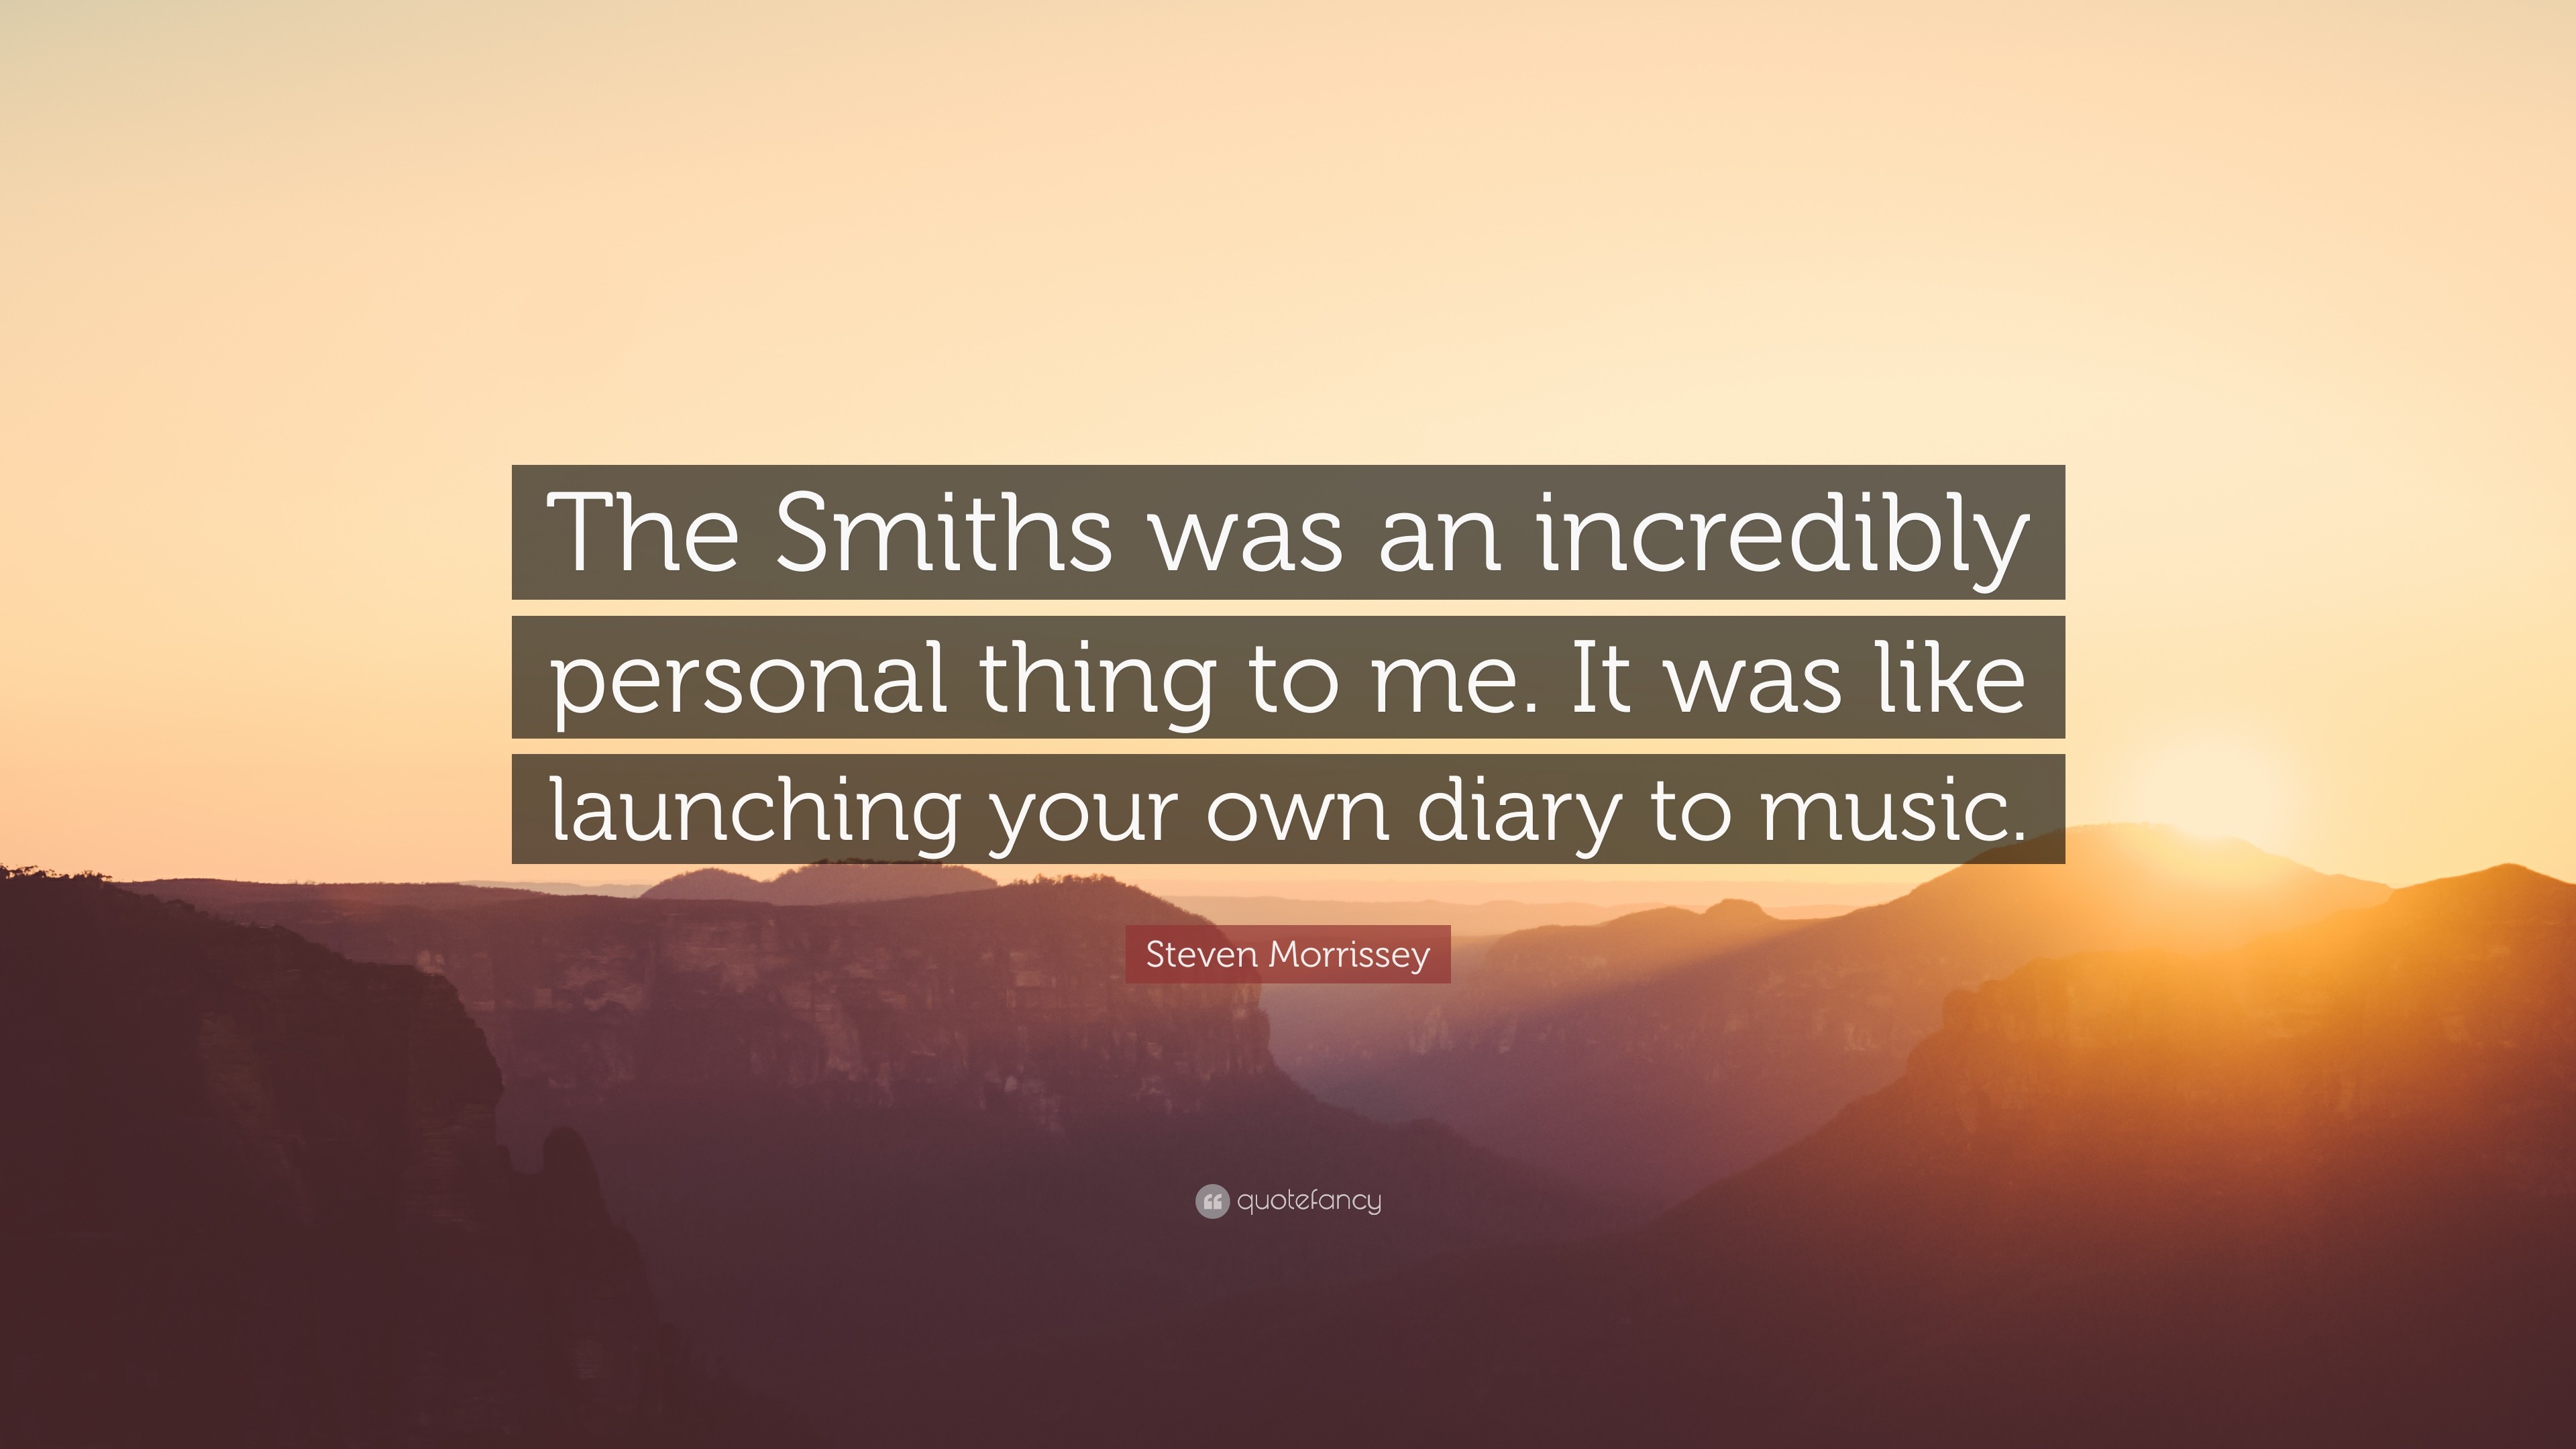 Steven Morrissey Quote The Smiths was an incredibly personal thing to me. It